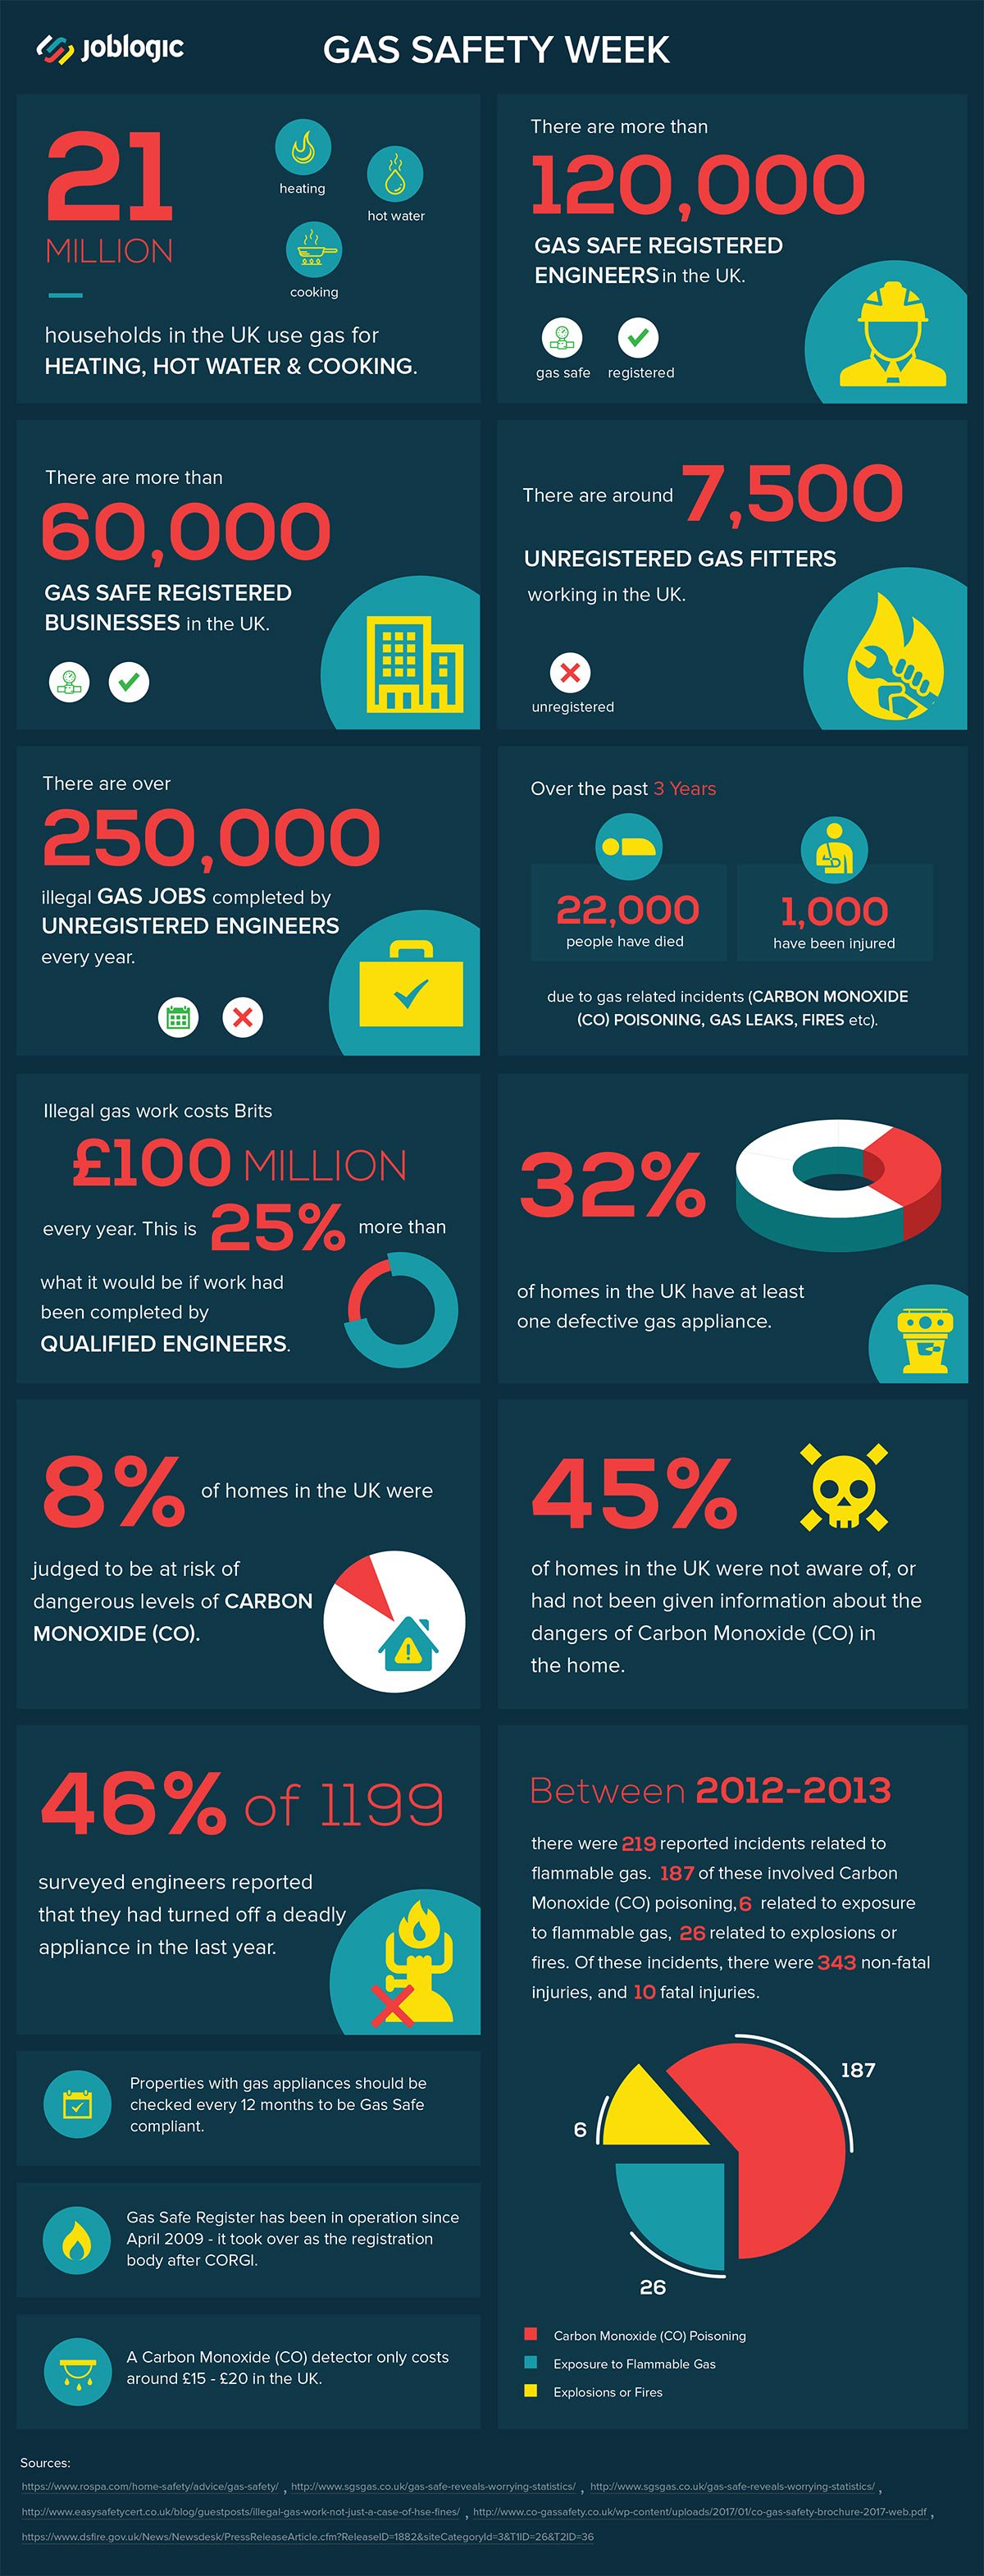 Gas Safety Week Infographic. Details of the infographic follow.

21 million households in the UK use gas for heating, hot water and cooking
There are more than 120,000 Gas Safe Registered engineers in the UK
There are more than 60,000 Gas Safe Registered businesses in the UK
There are around 7,500 unregistered gas fitters working in the UK
There are over 250,000 illegal gas jobs completed by unregistered engineers every year
Over the past 3 years, over 22,000 people have died and 1,000 people have been injured due to gas related incidents
Illegal gas work costs Brits £100 million every year - this is more than 25% more than it would be if the work had been completed by qualified engineers
32% of homes in the UK have at least 1 defective gas applience
8% of homes in the UKwere judged to be at risk of dangerous levels of carbon monoxide
45% of homes in the UK were not aware of, or had not been given information about the dangers of carbon monoxide in the home
46% of 1199 engineers surveyed reported that the had turned off a deadly applience last year
Between 2012 and 2023 there were 219 reported incidents related to flamable gas. 187 of these involed carbon monoxide poisoning, 6 were related to exposure to flamable gas, 26 related to explosions or fires. Of these incidents, there were 343 non-fatal injuried and 10 fatal injuries
Properties with gas appliences should be checked every twelve months to be gas safe complient
Gas Safe Register has been in operation since 2009
A carbon monoxide detector only costs between £15 - £20 in the UK